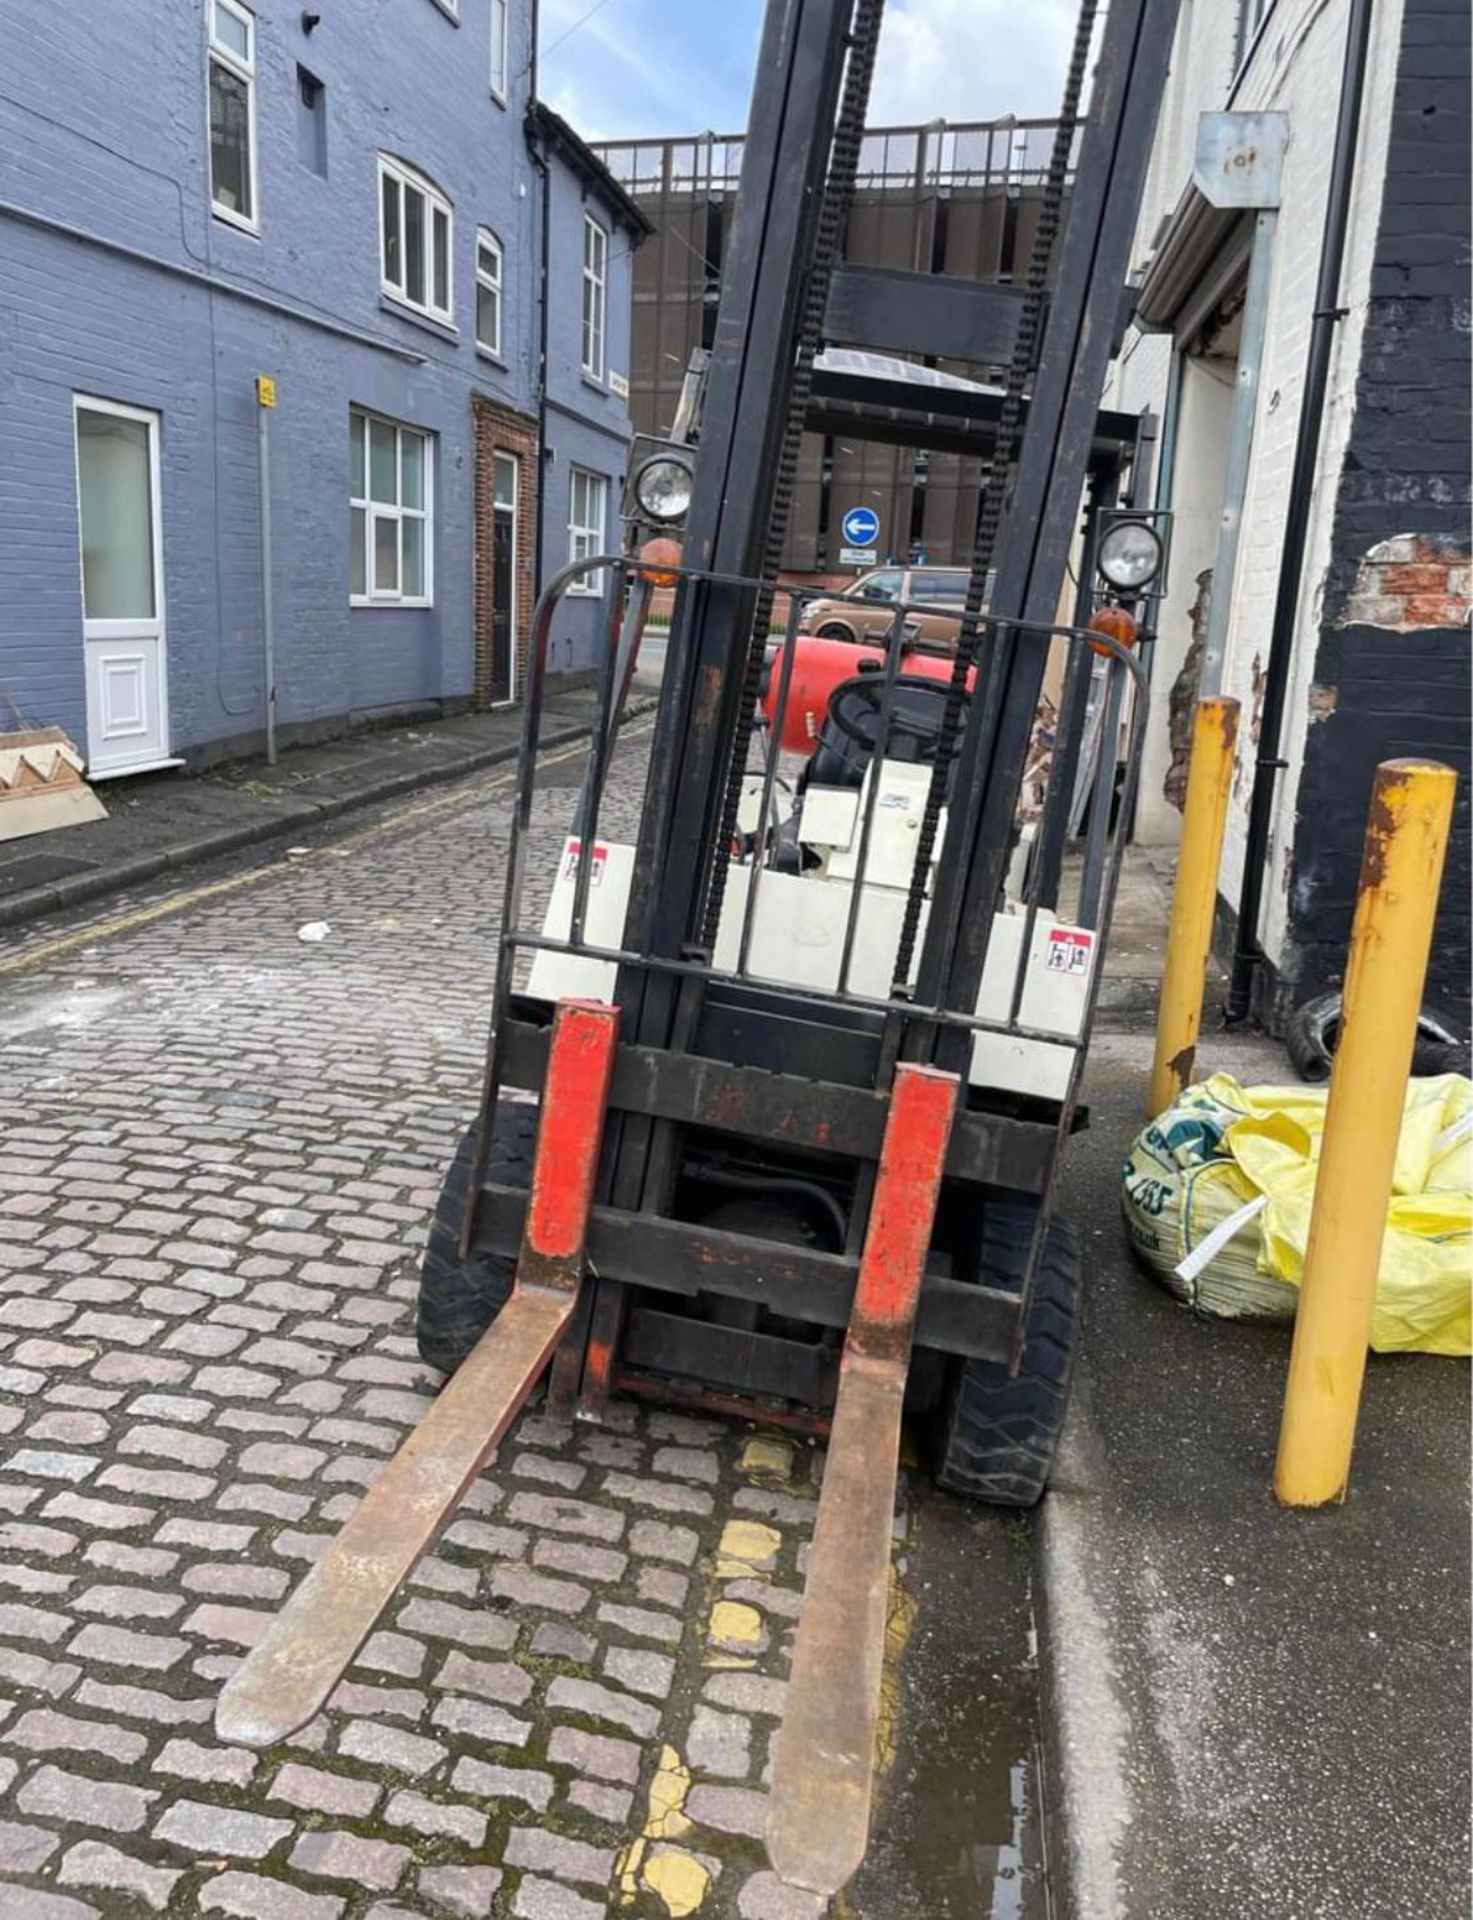 NISSAN 2.5TON GAS FORKLIFT - 5430 HOURS - Image 2 of 10